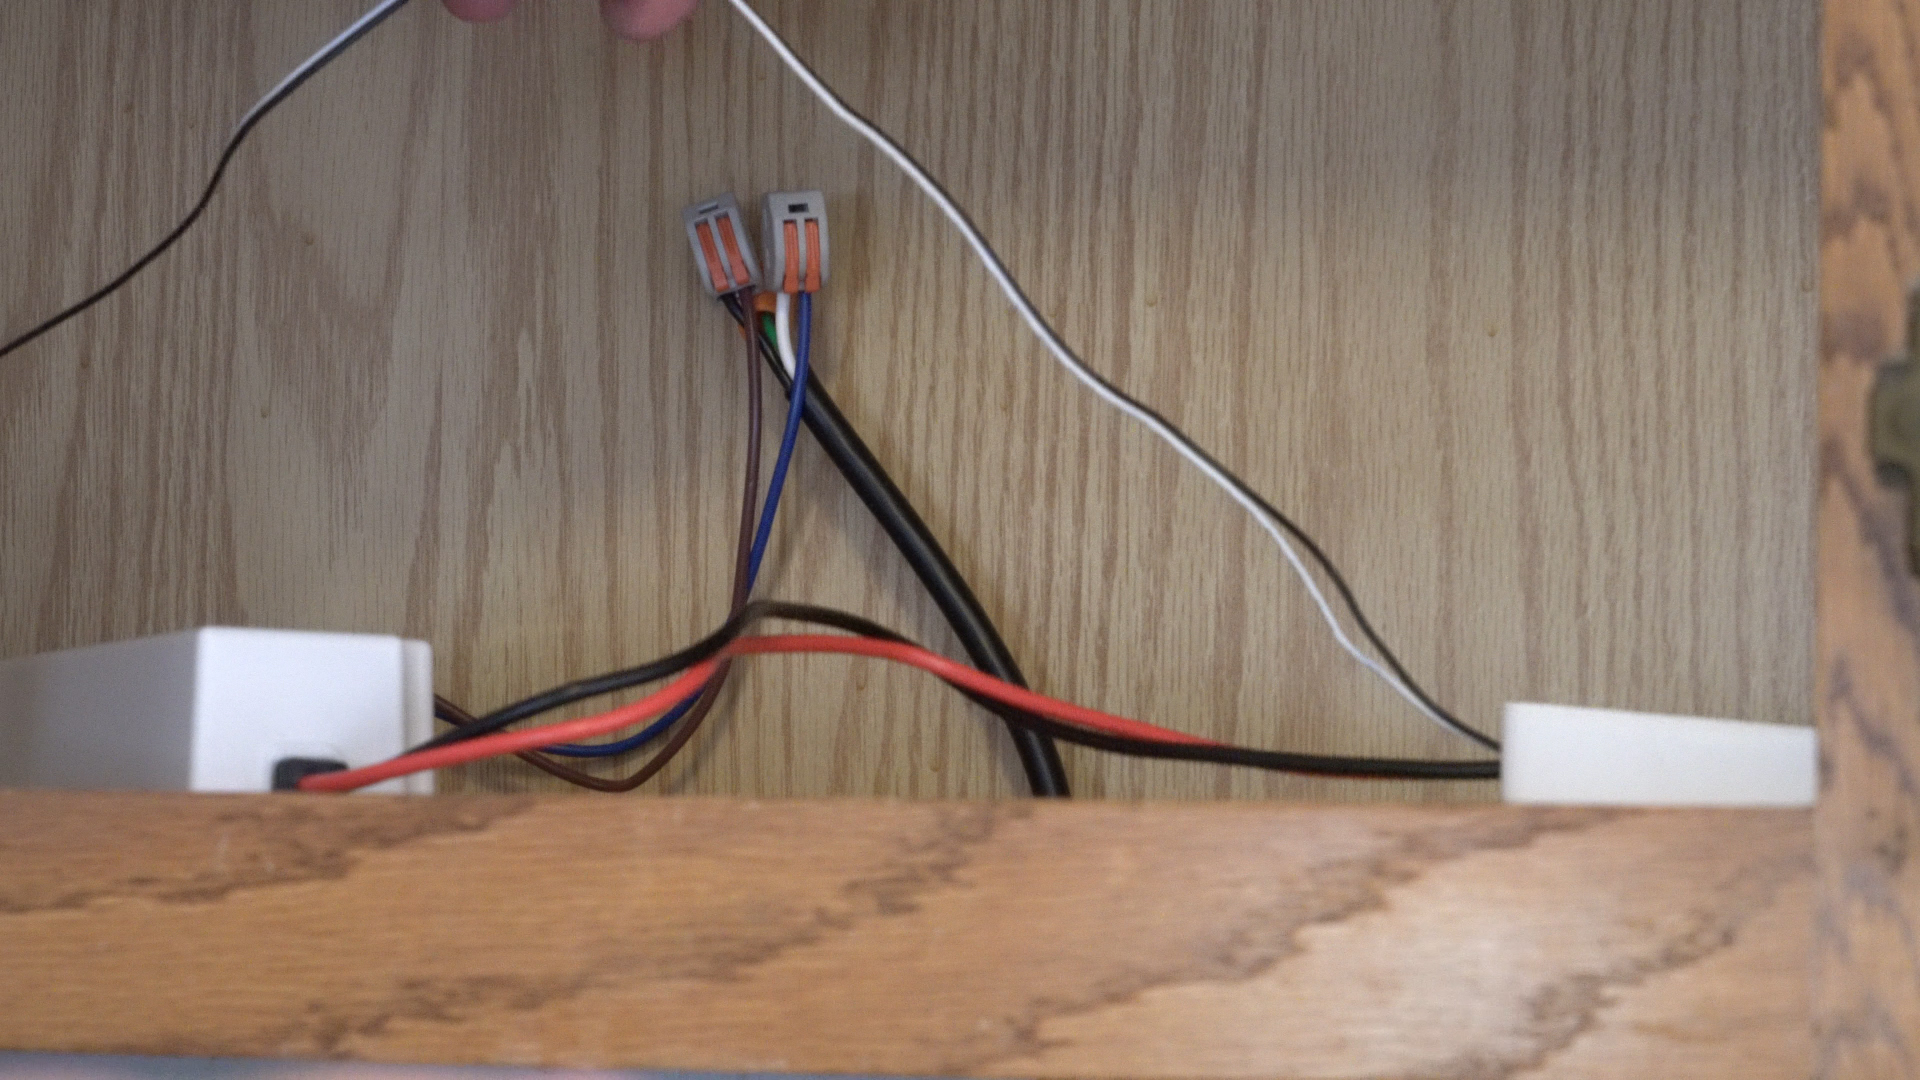 Above-Cabinet Lighting: How to Install LED Strip Lights - step 2